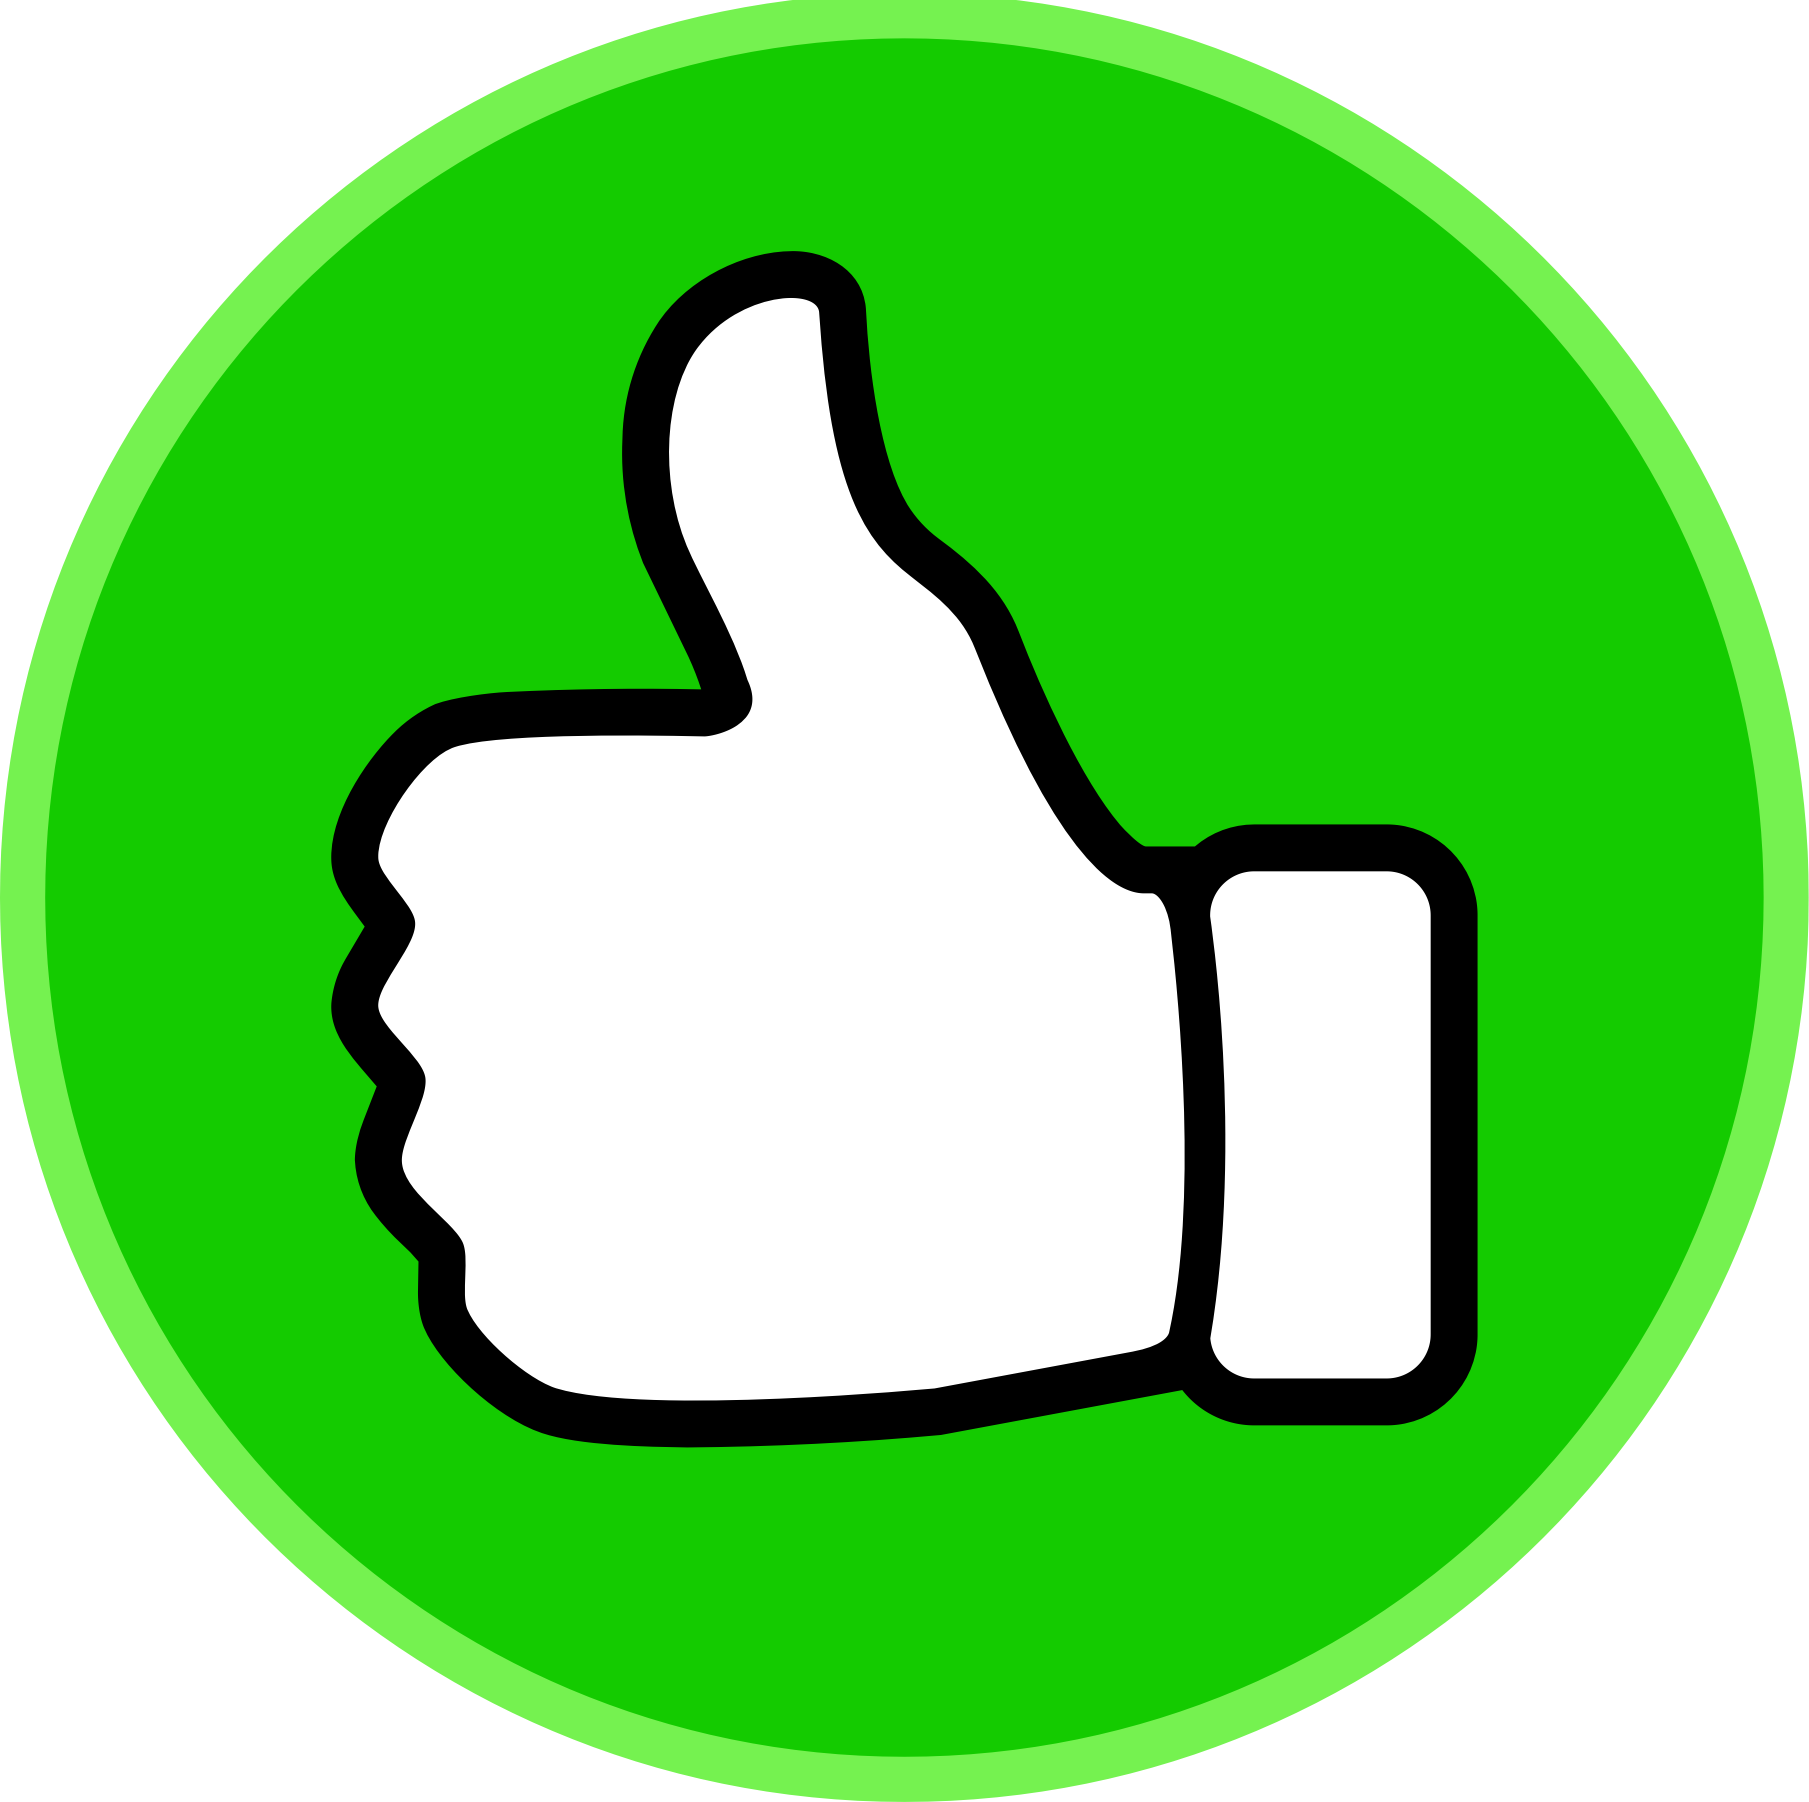 Thumbs-up-clipart-2.png